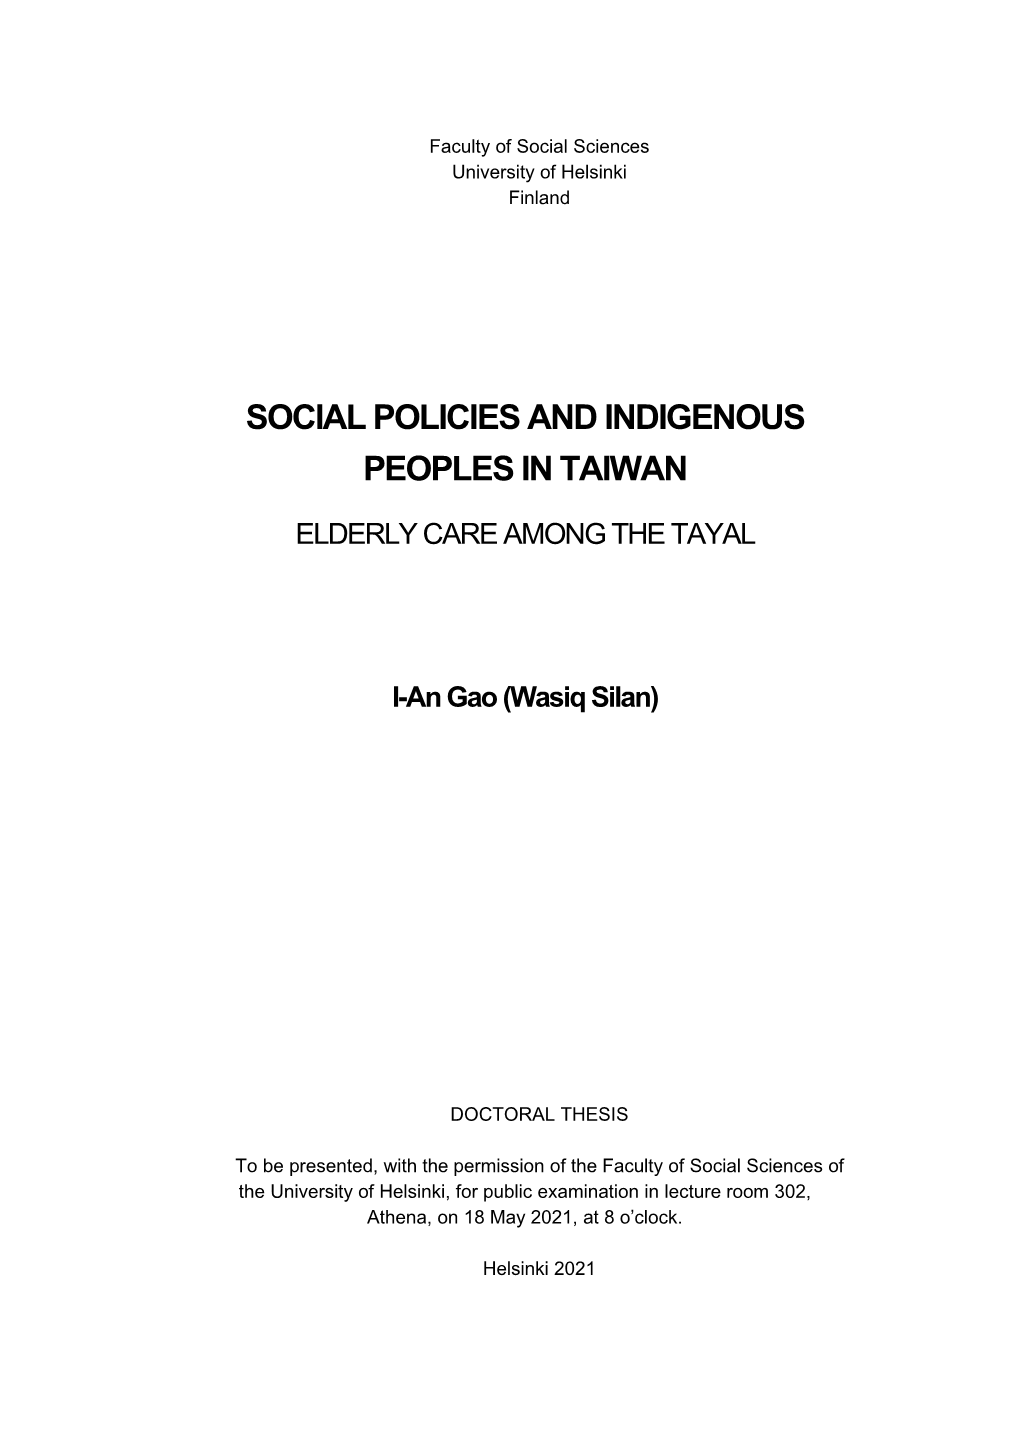 Social Policies and Indigenous Peoples in Taiwan